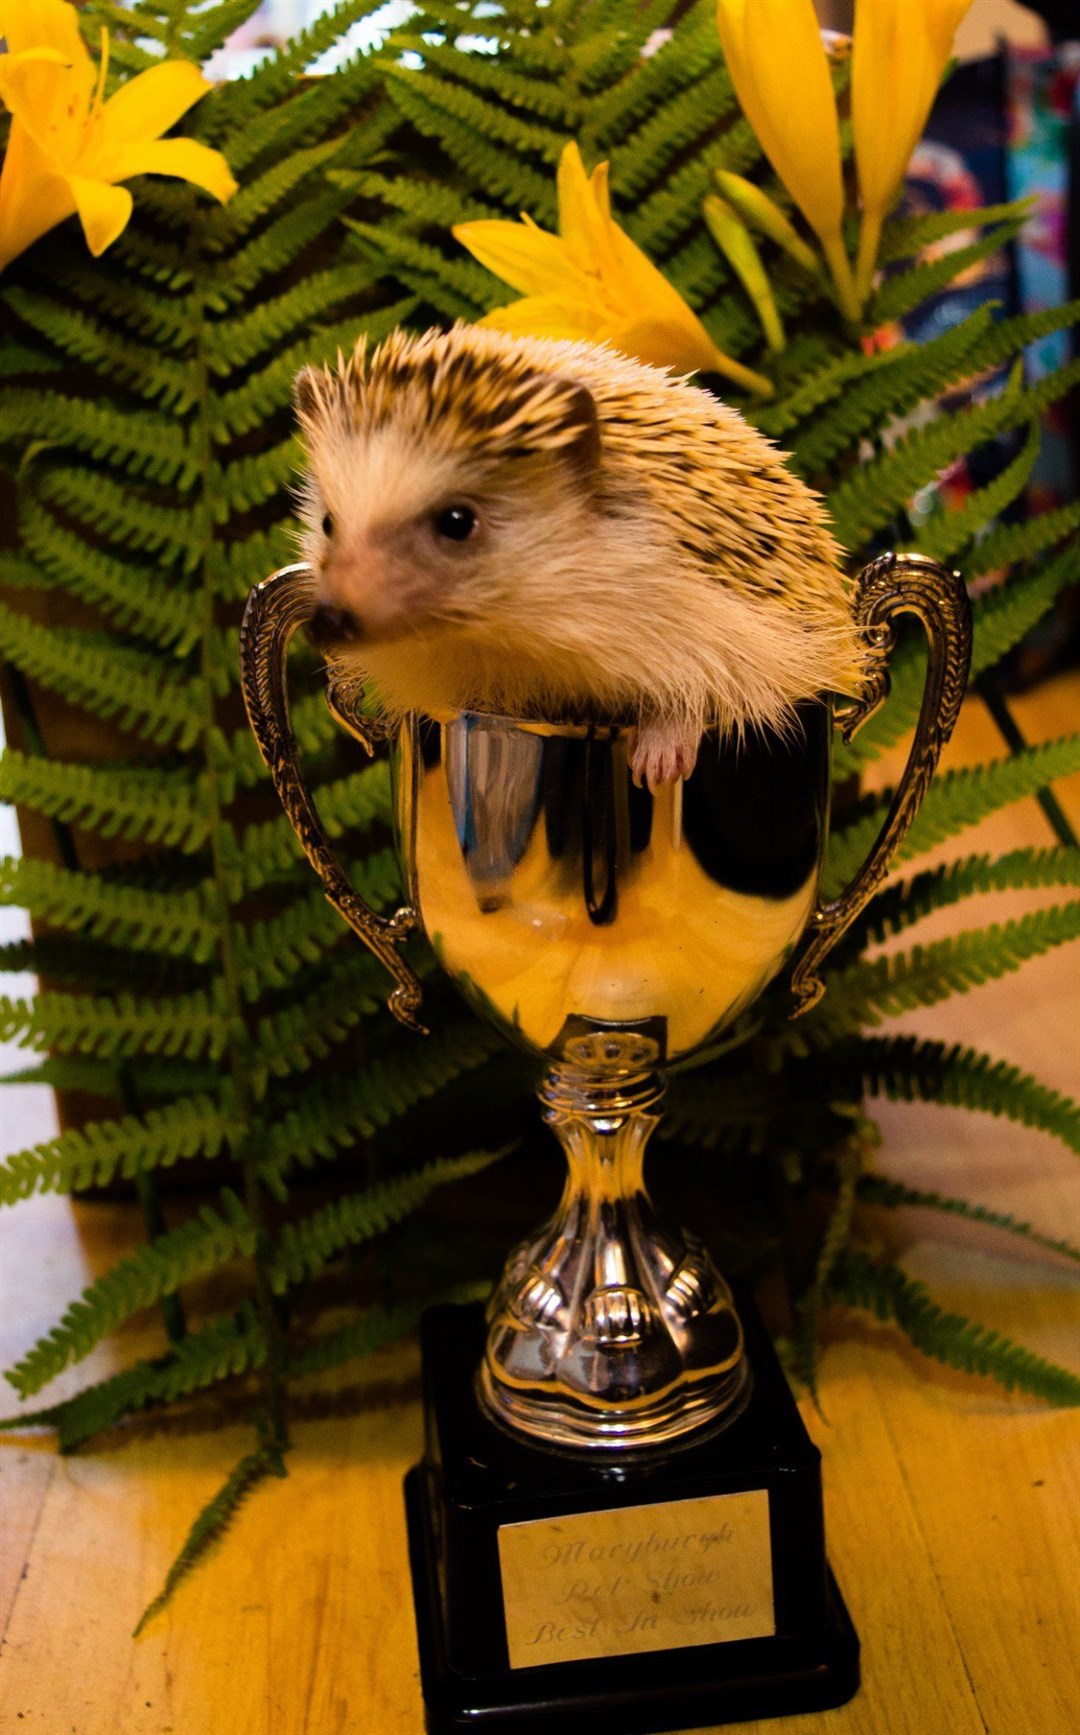 Squishy in his trophy.